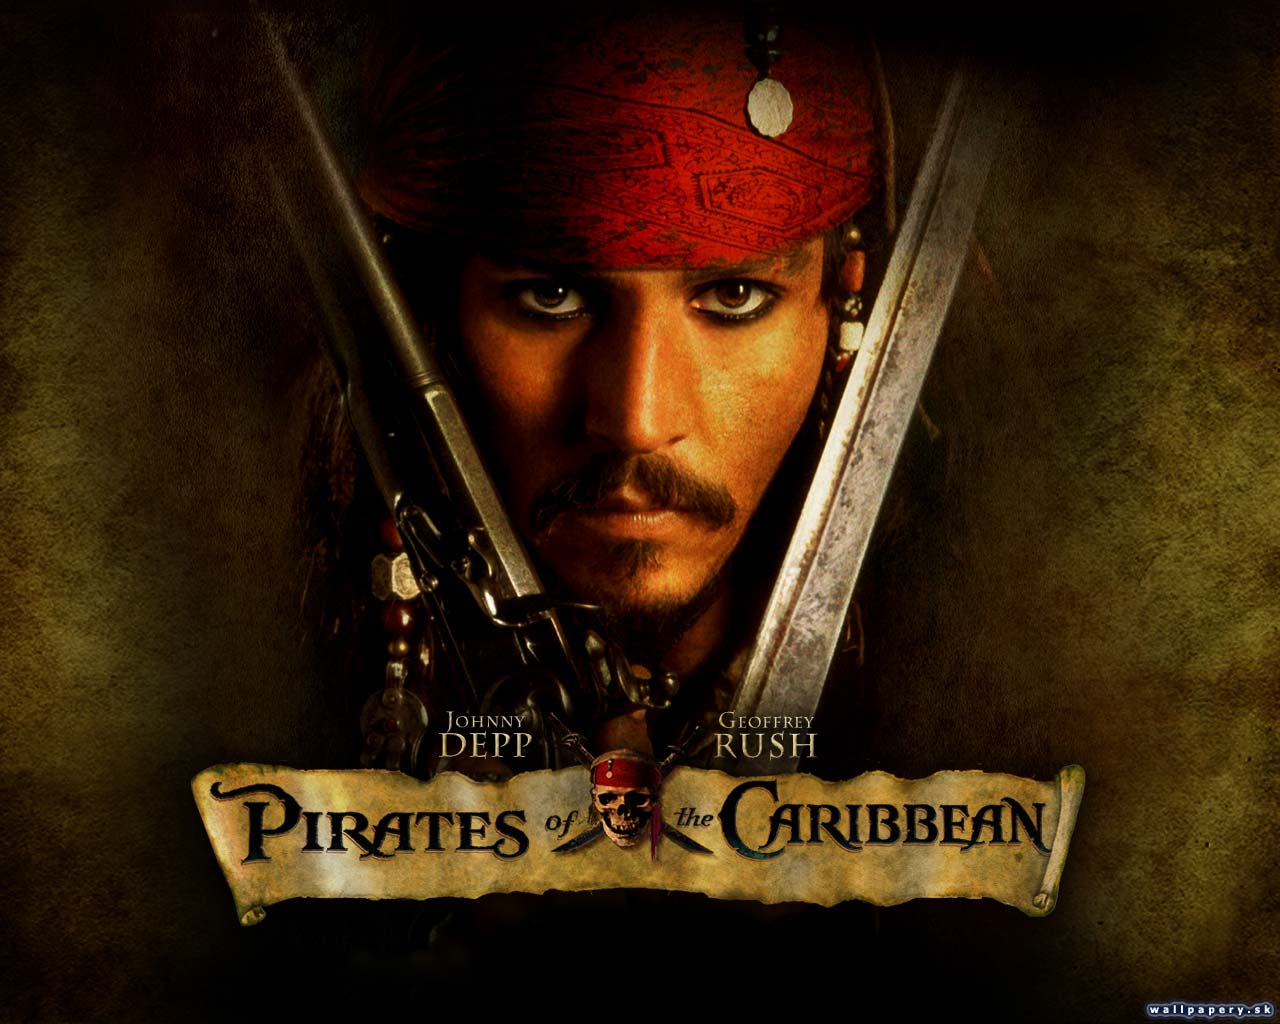 Pirates of the Caribbean - wallpaper 3